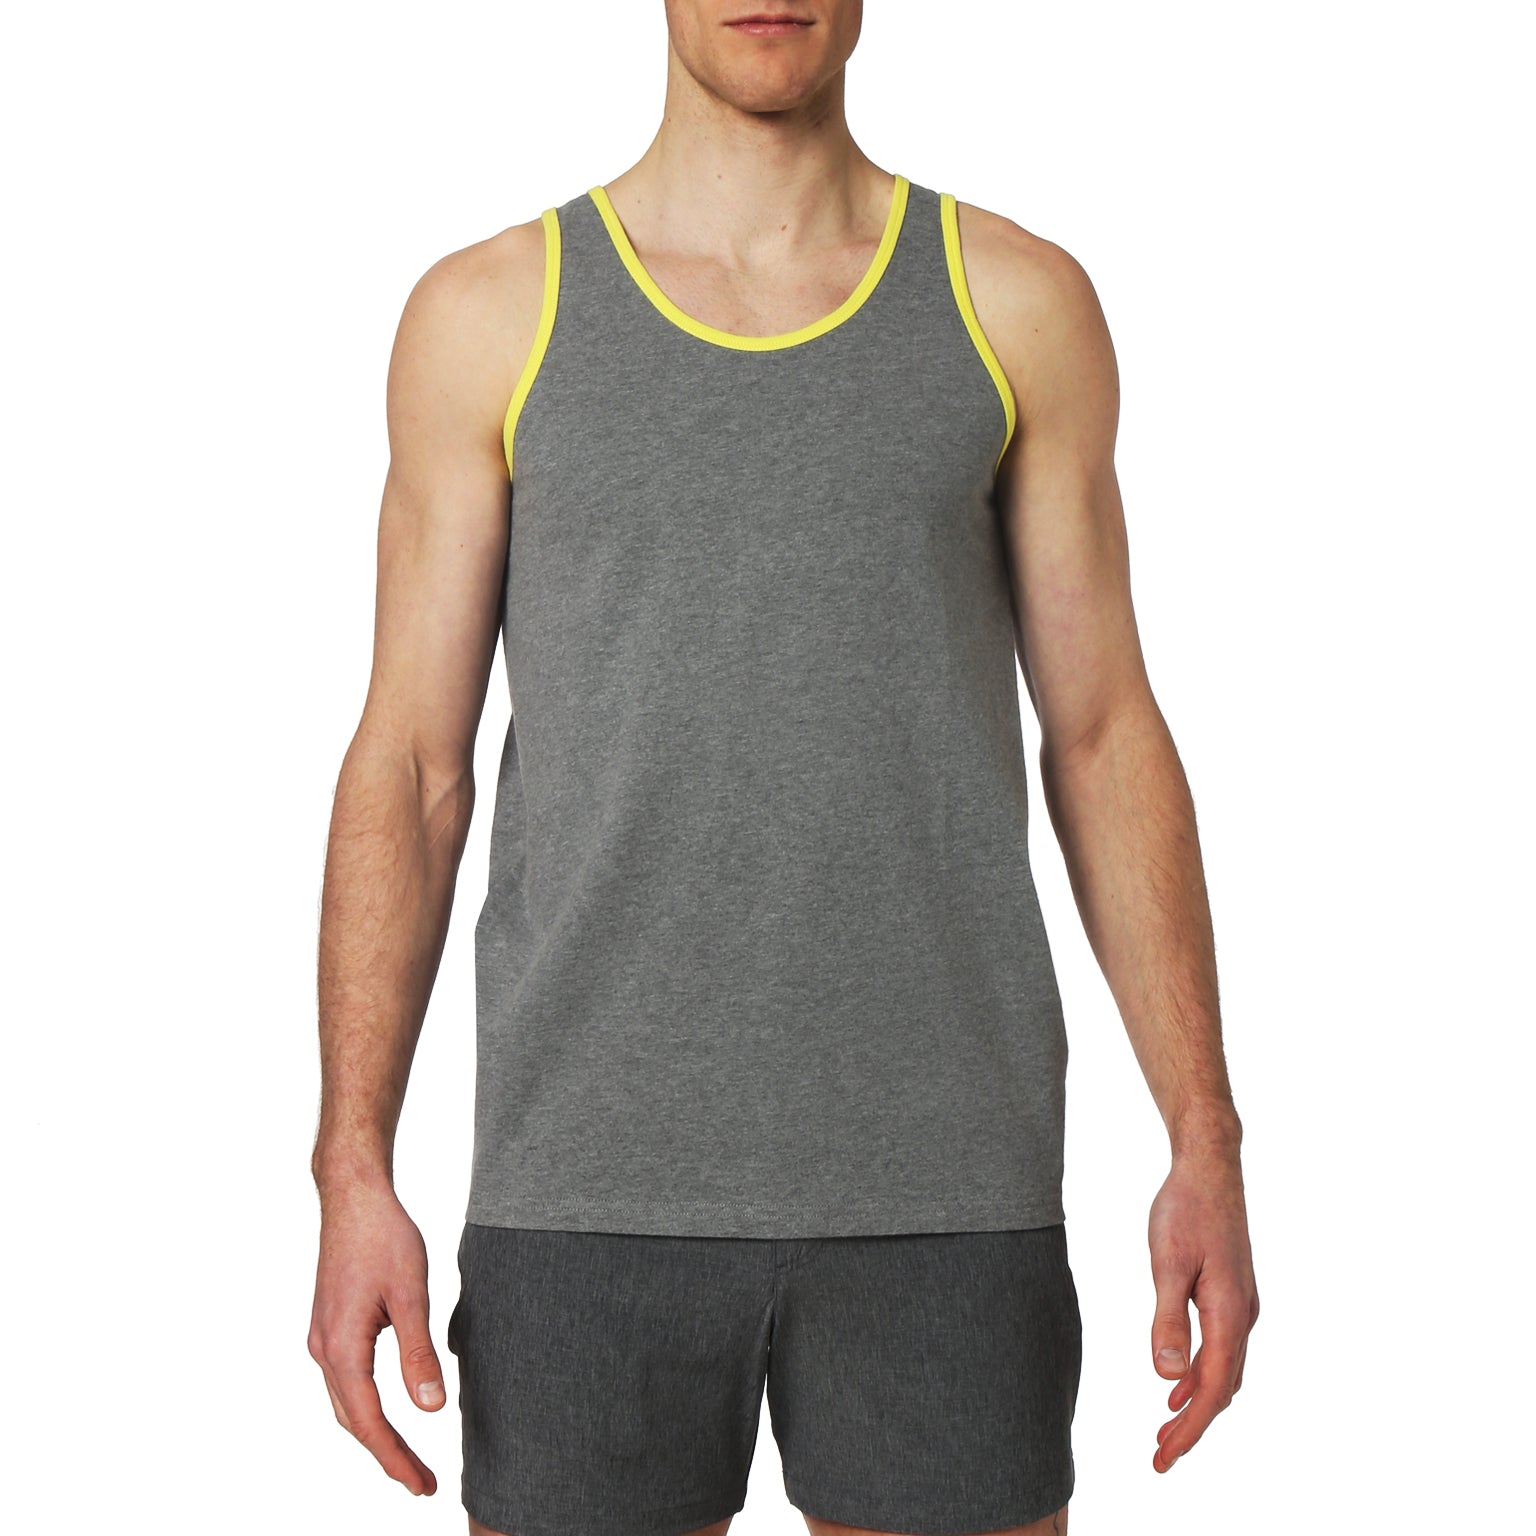 ACTIONWEAR- Varsity Grey/Canary Essential Combo Cotton Tank Top